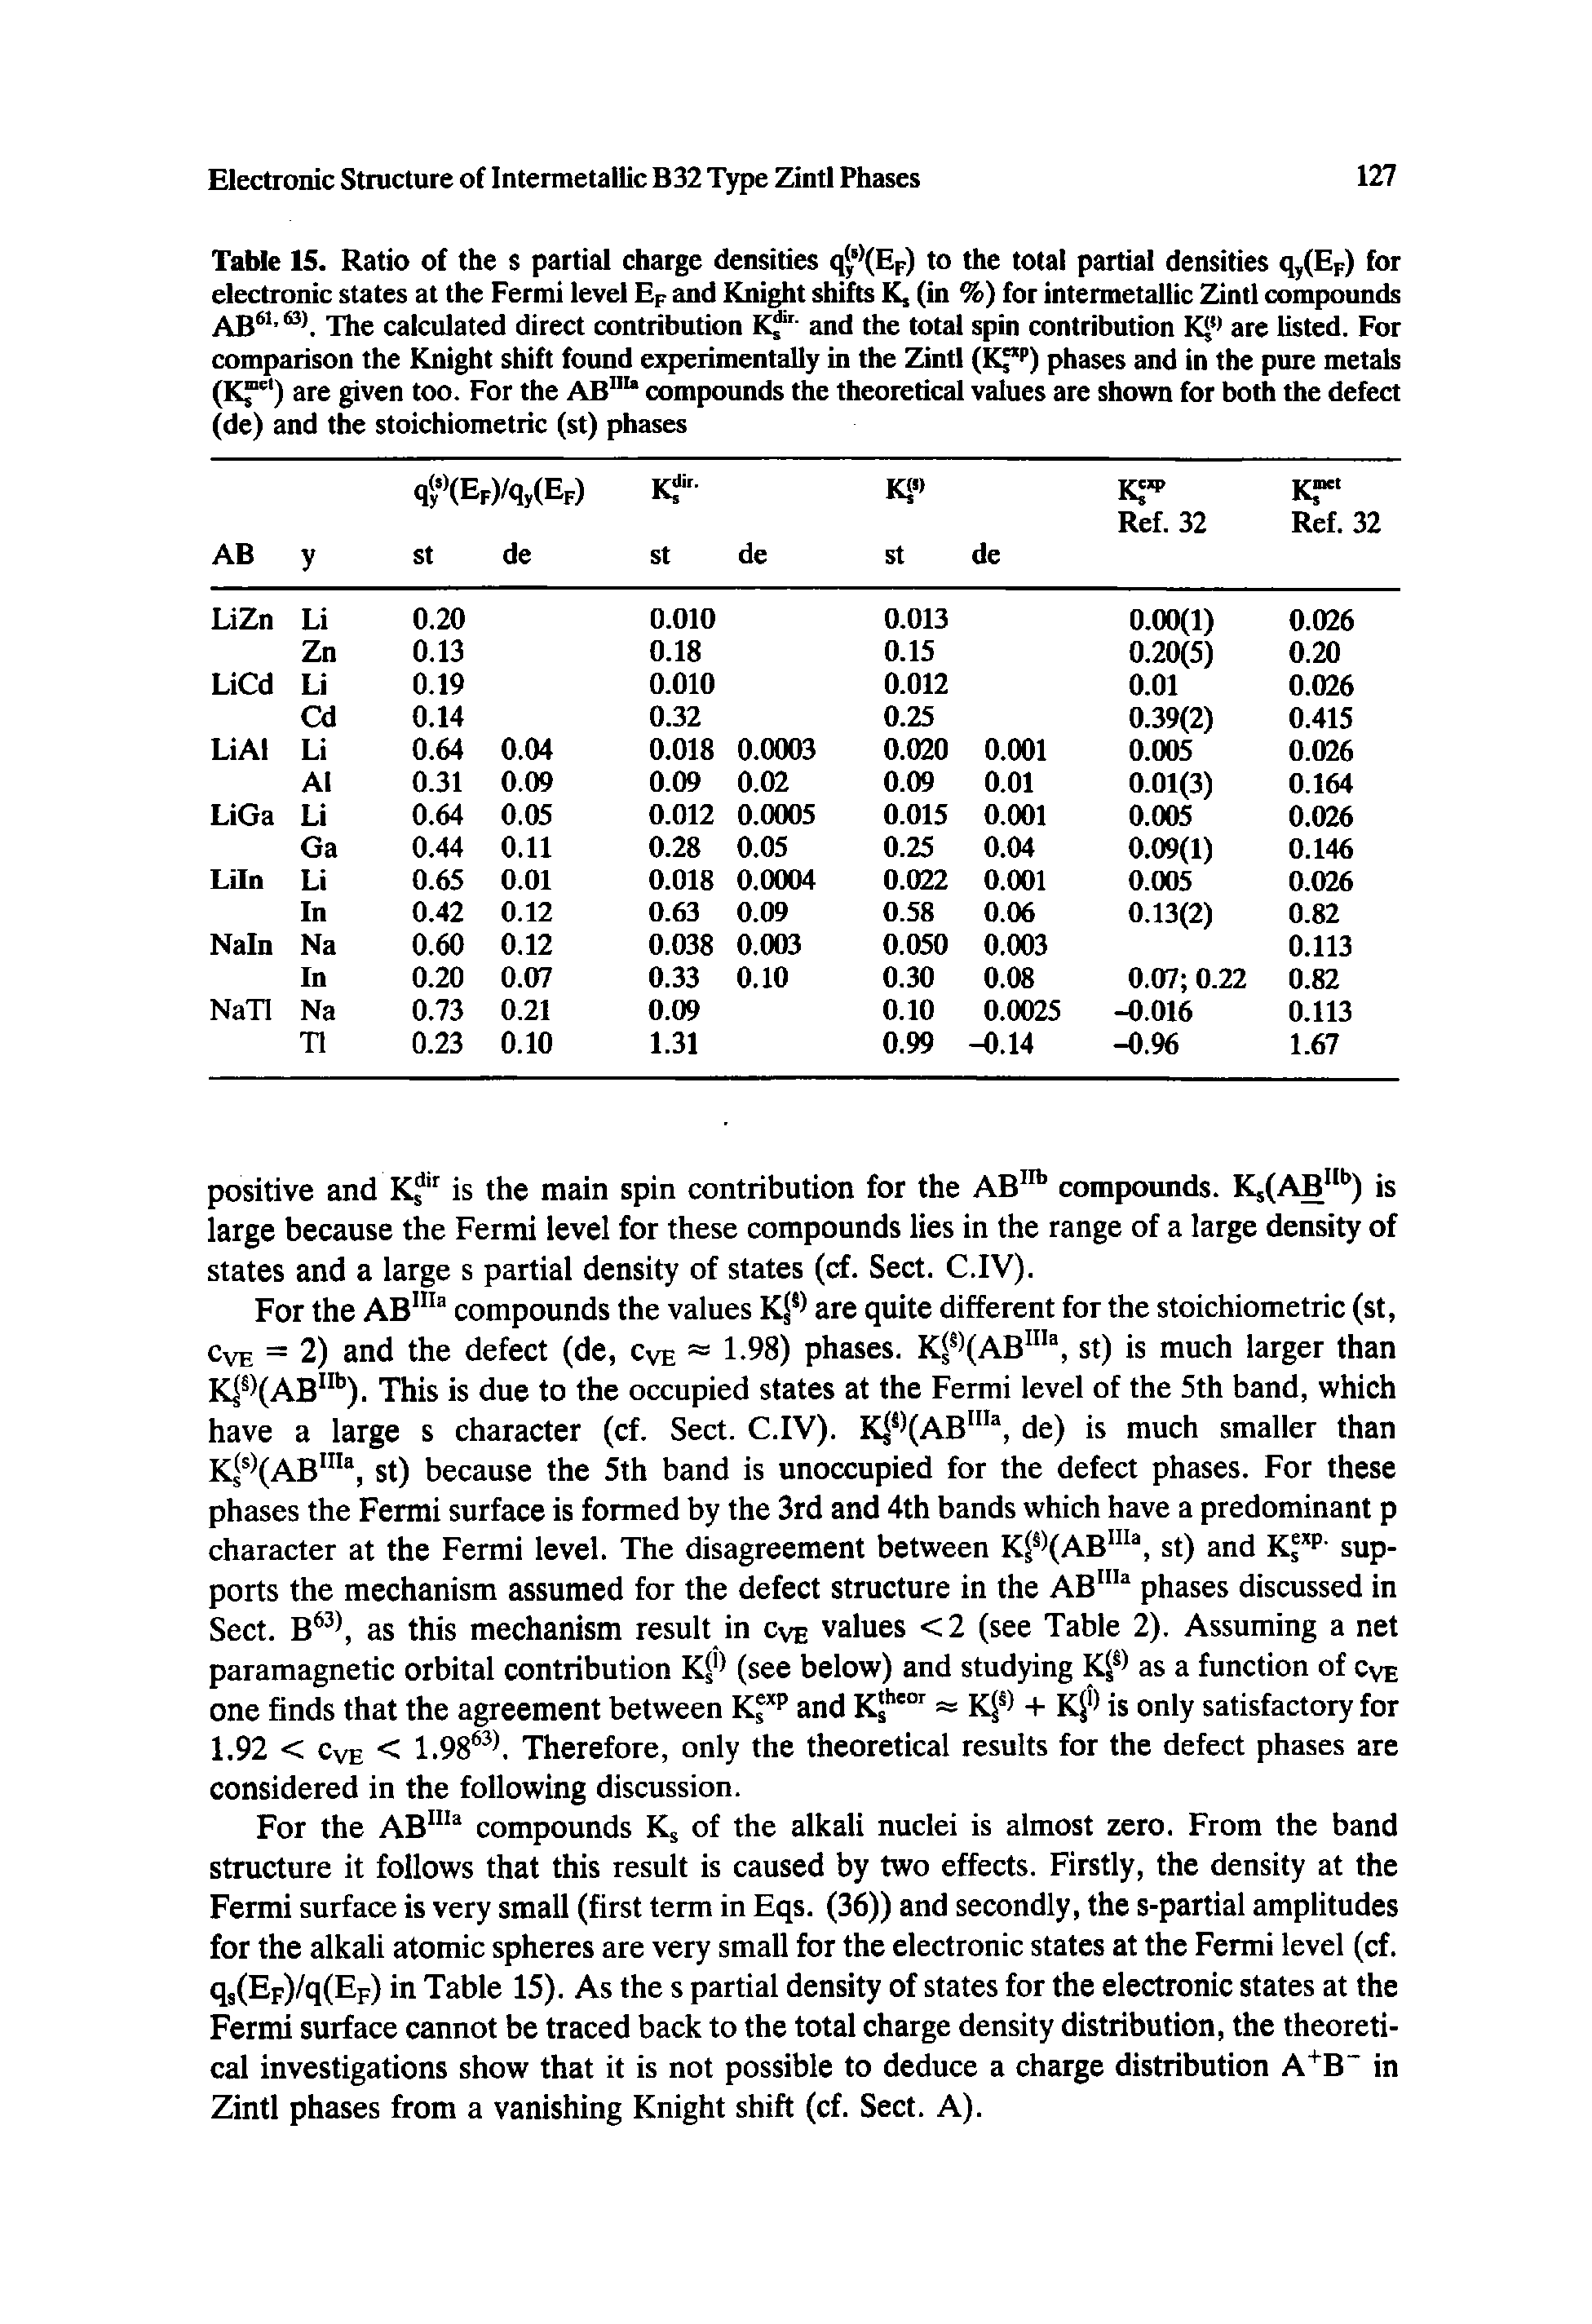 Table 15. Ratio of the s partial charge densities q / Ep) to the total partial densities qy(Ep) for electronic states at the Fermi level Ep and Knight shifts K, (in %) for intermetallic Zintl compounds AB The calculated direct contribution K - and the total spin contribution K< are listed. For comparison the Knight shift found experimentally in the Zintl (K ) phases and in the pure metals (KJ" ) are given too. For the AB compounds the theoretical values are shown for both the defect (de) and the stoichiometric (st) phases...